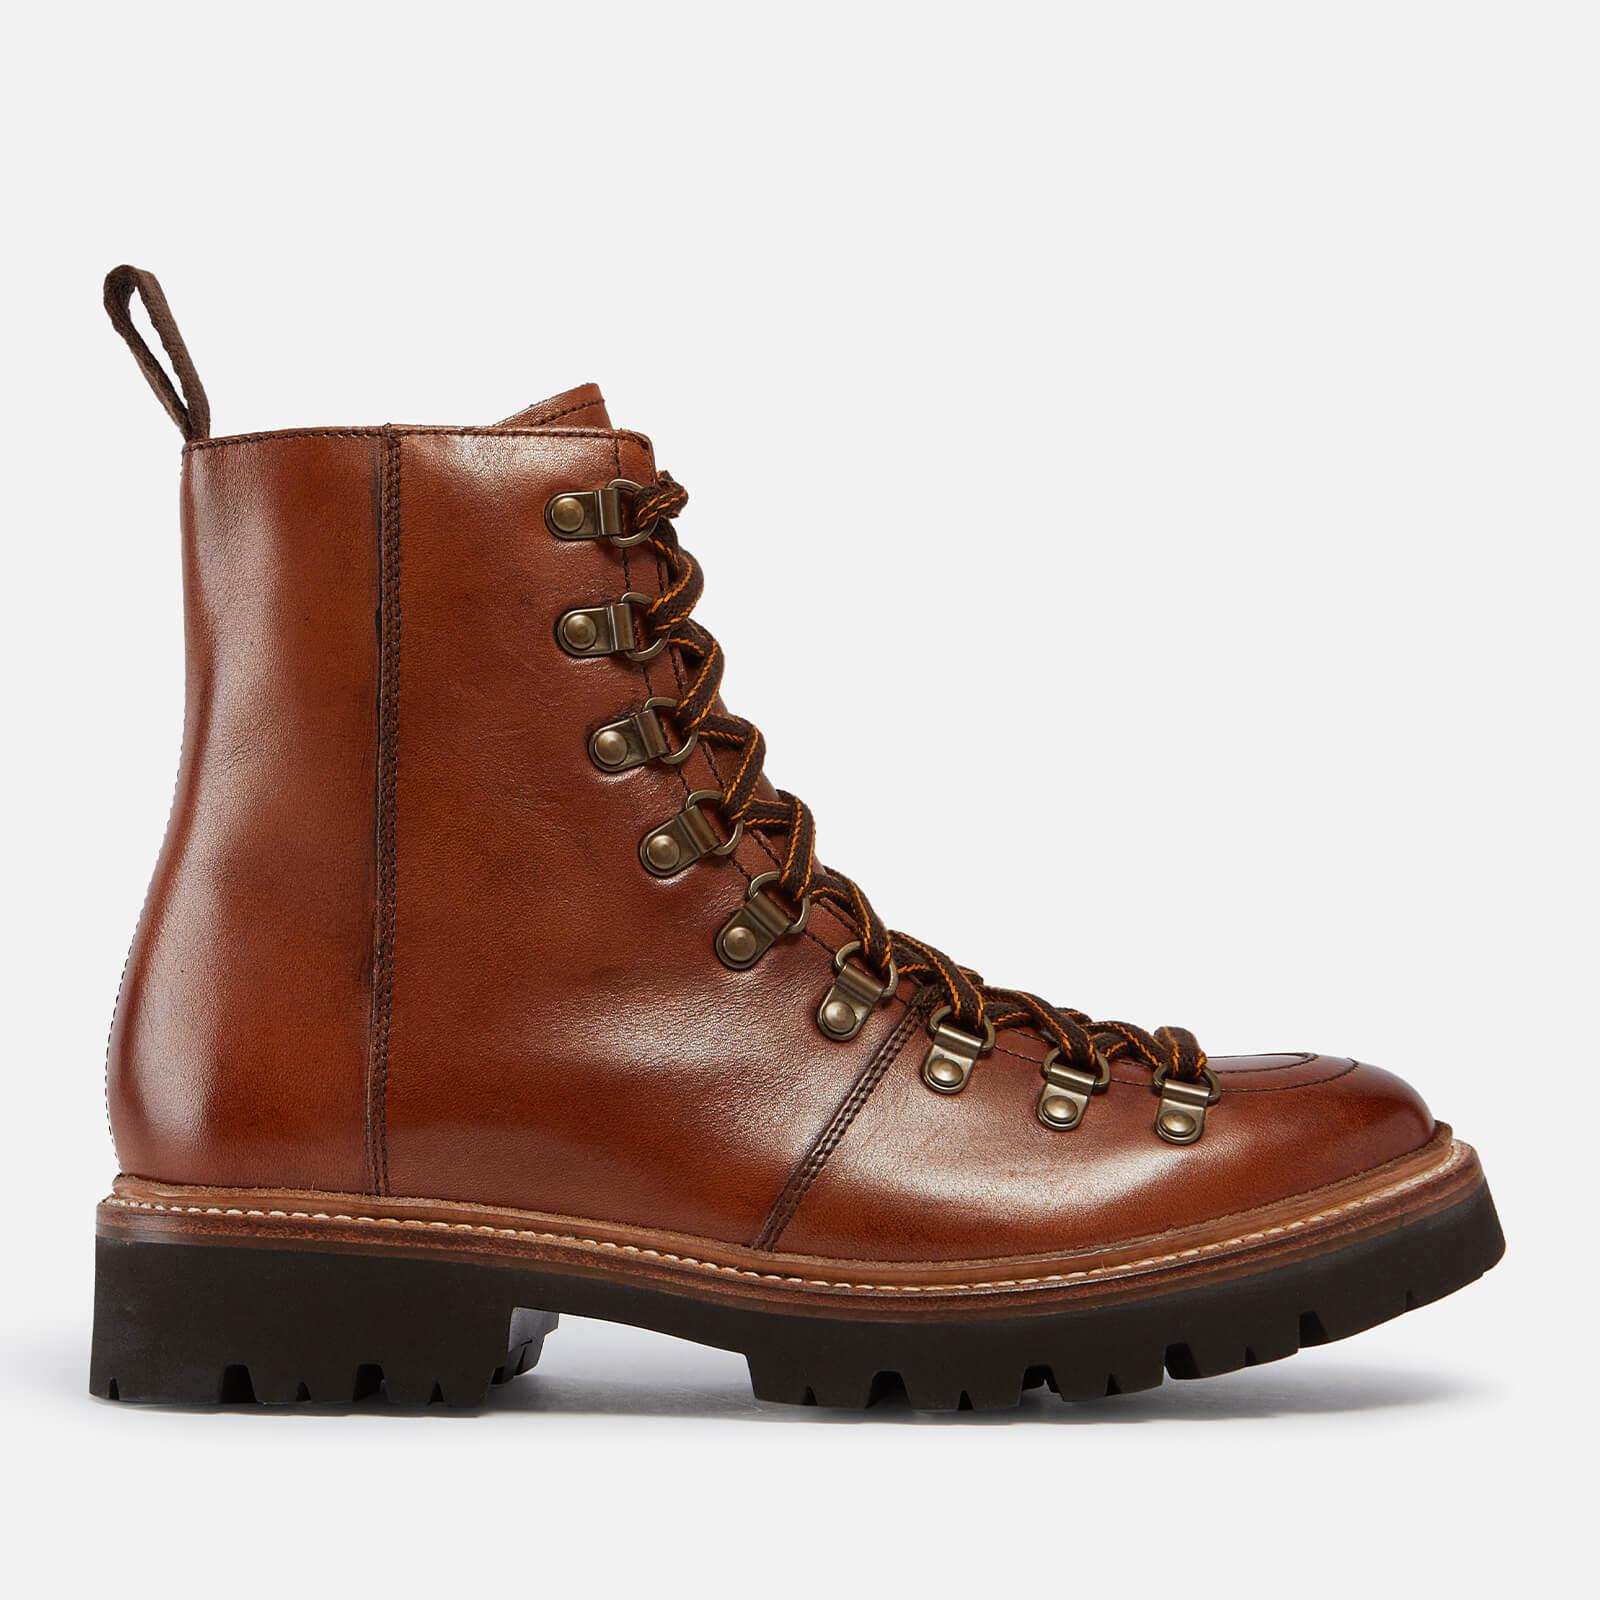 Grenson Nanette Hand Painted Leather Hiking Style Boots in Brown | Lyst